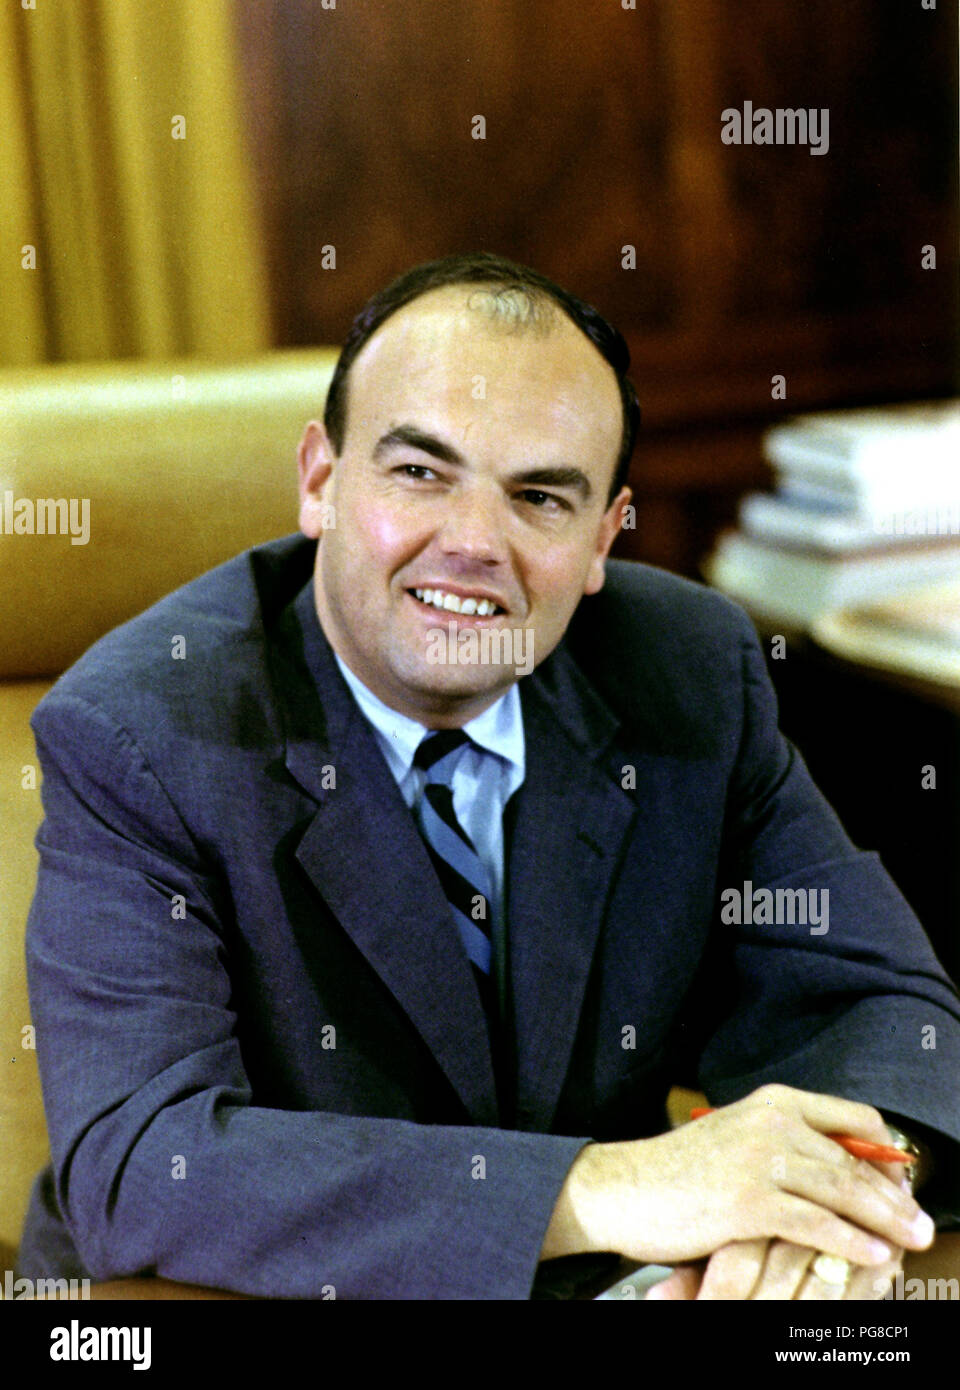 Portrait of John D. Ehrlichman taken in Washington, D.C. on April 22, 1970. He served as Domestic Affairs Advisor to United States President Richard M. Nixon until his forced resignation on April 30, 1973 for his involvement in the Watergate Affair. Ehrlichman served 18 months in prison for his role in Watergate. He was born John Daniel Ehrlichman on March 20, 1925 in Tacoma, Washington. He died of complications from diabetes at his home in Atlanta, Georgia on February 14, 1999.Credit: White House / CNP +++(c) dpa - Report+++ | usage worldwide Stock Photo